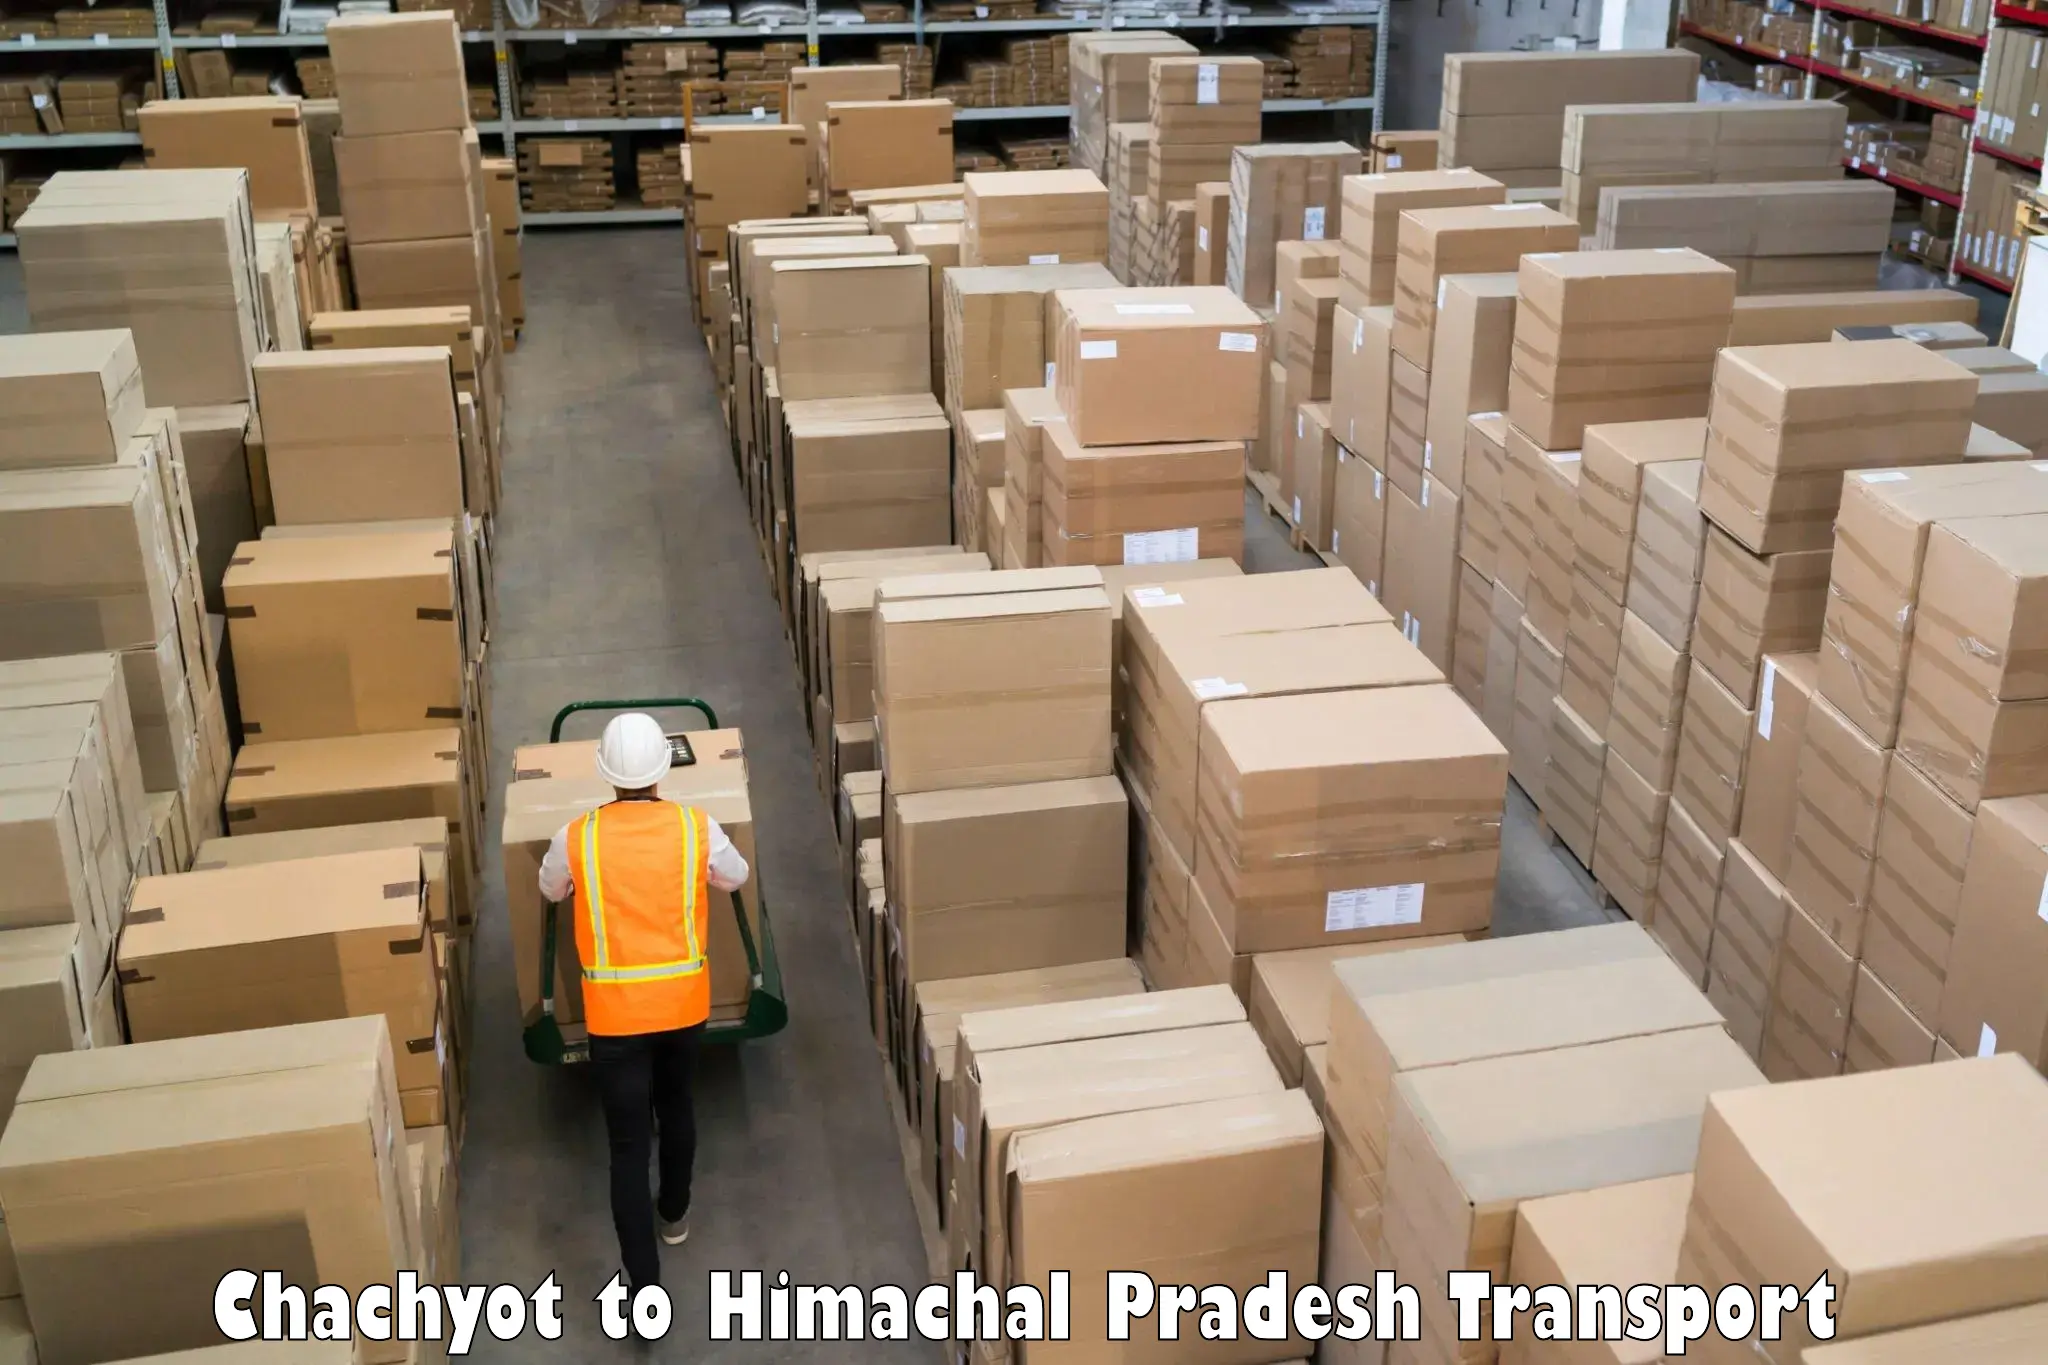 Transportation services in Chachyot to Bilaspur Himachal Pradesh